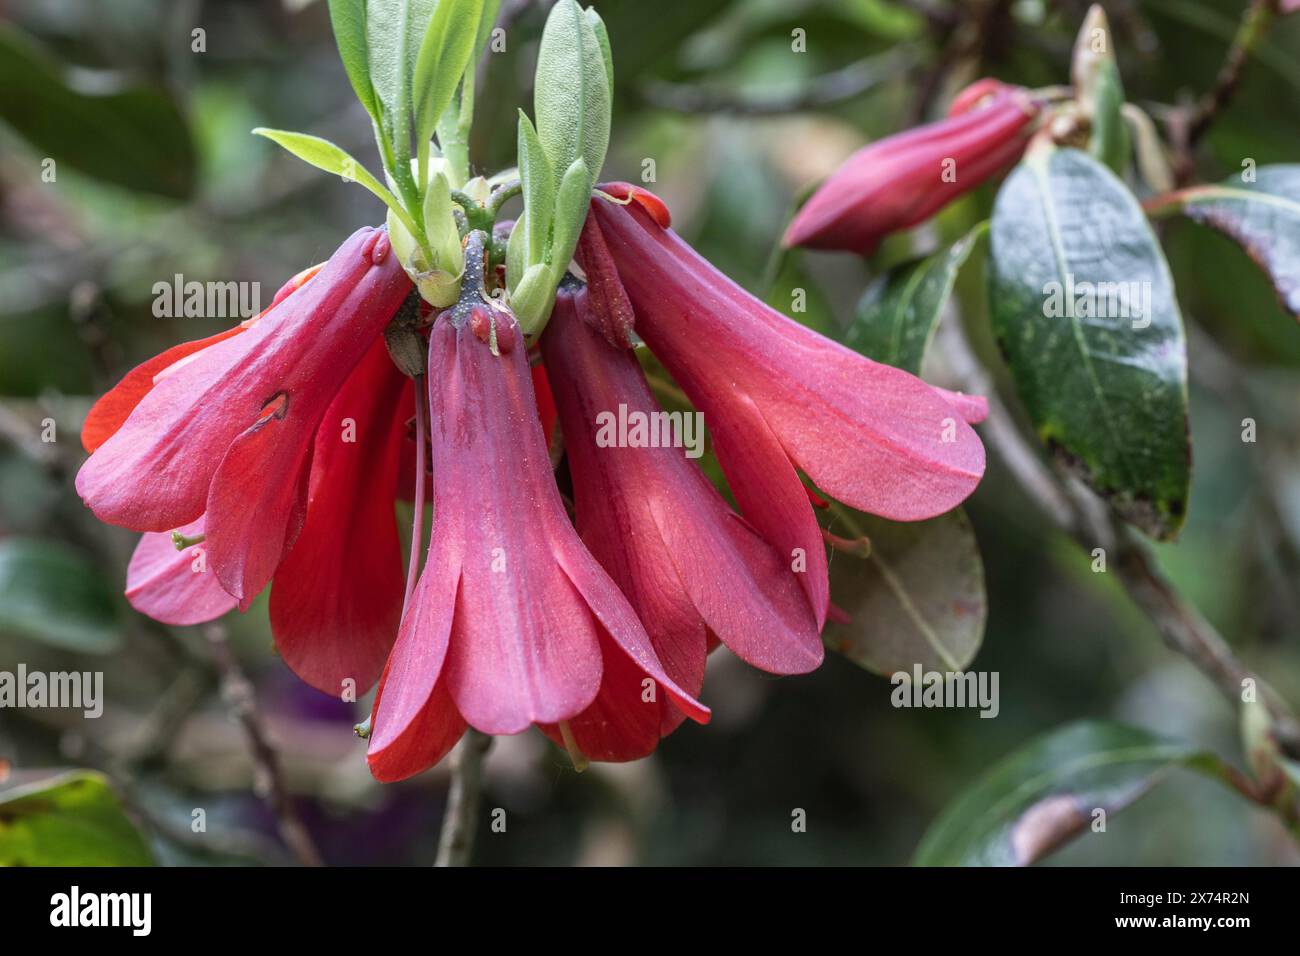 Rhododendron blossoms (Rhododendron cinnabarinum Roylei), Emsland, Lower Saxony, Germany, Europe Stock Photo